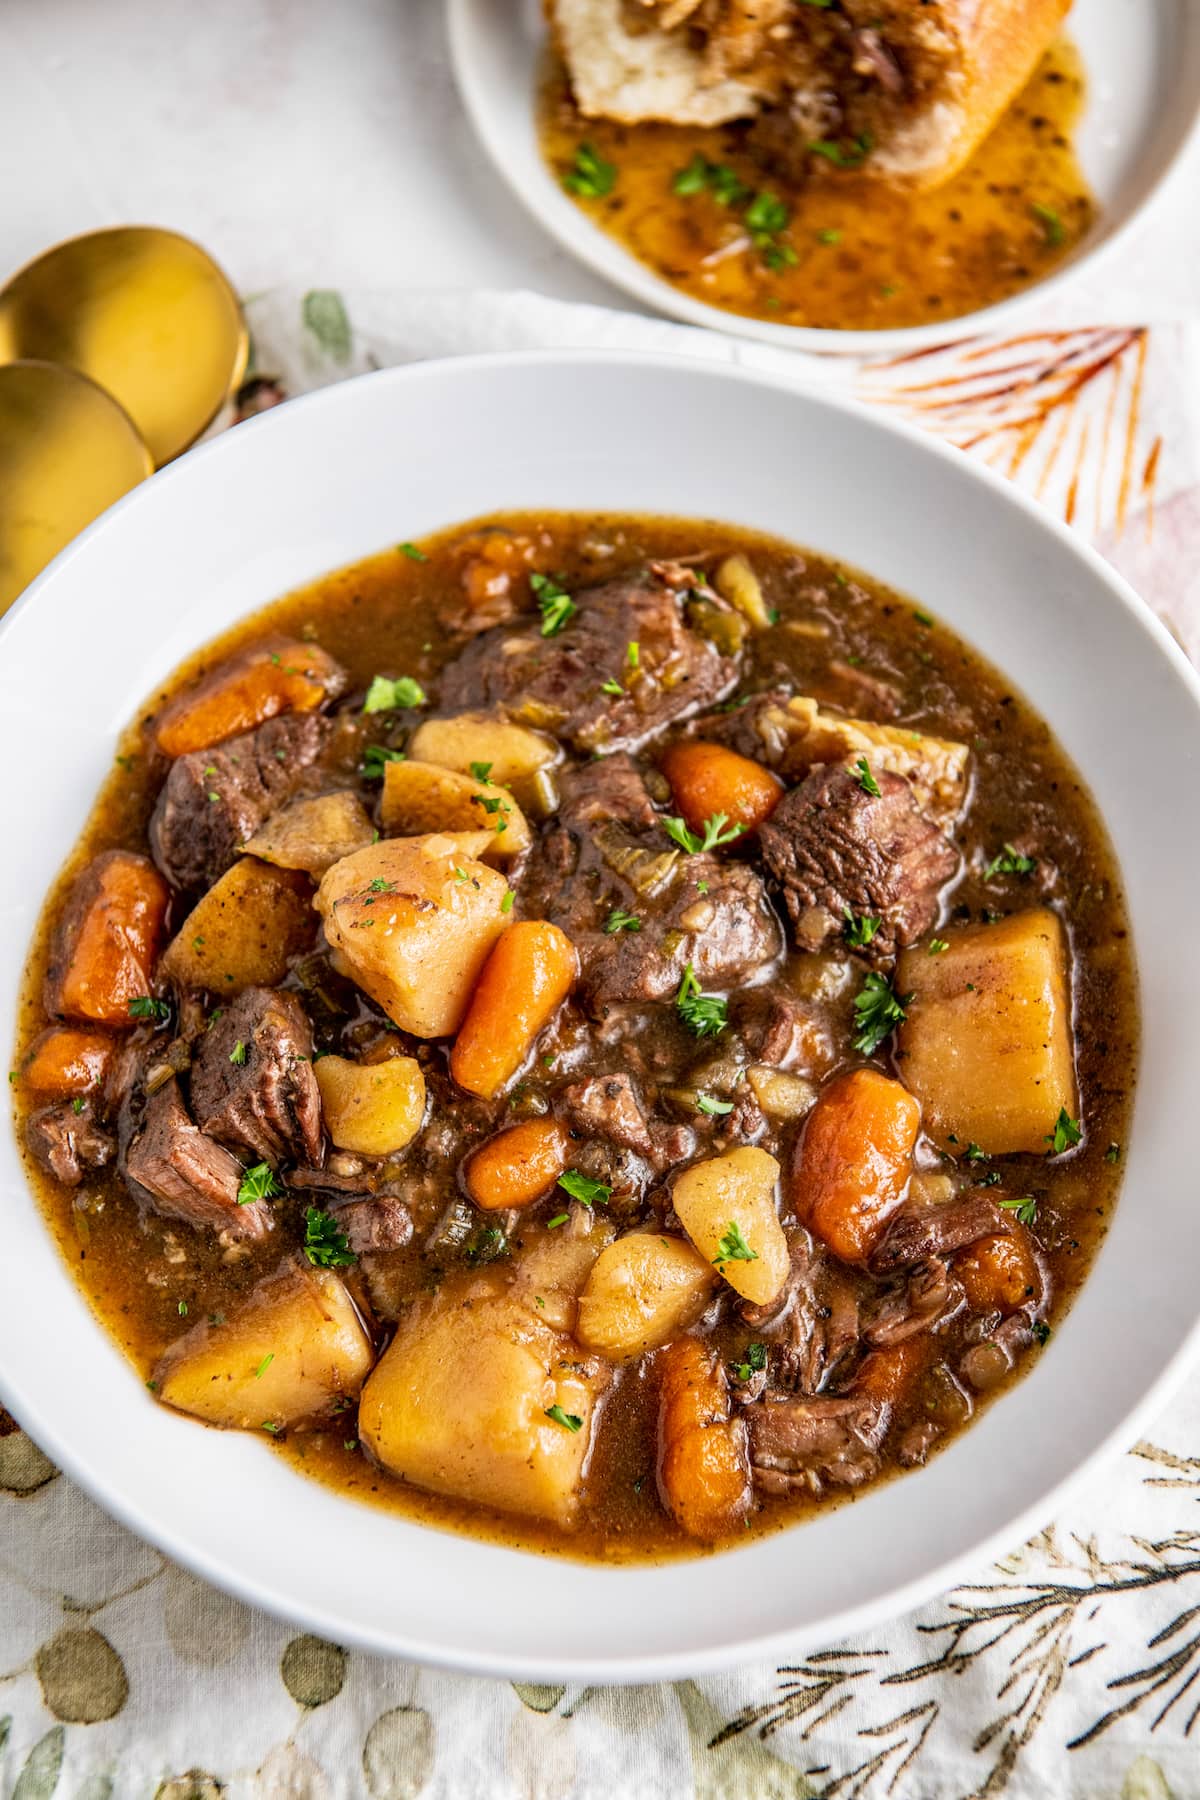 A bowl of beef stew that's loaded with carrots, potatoes, and stew meat.